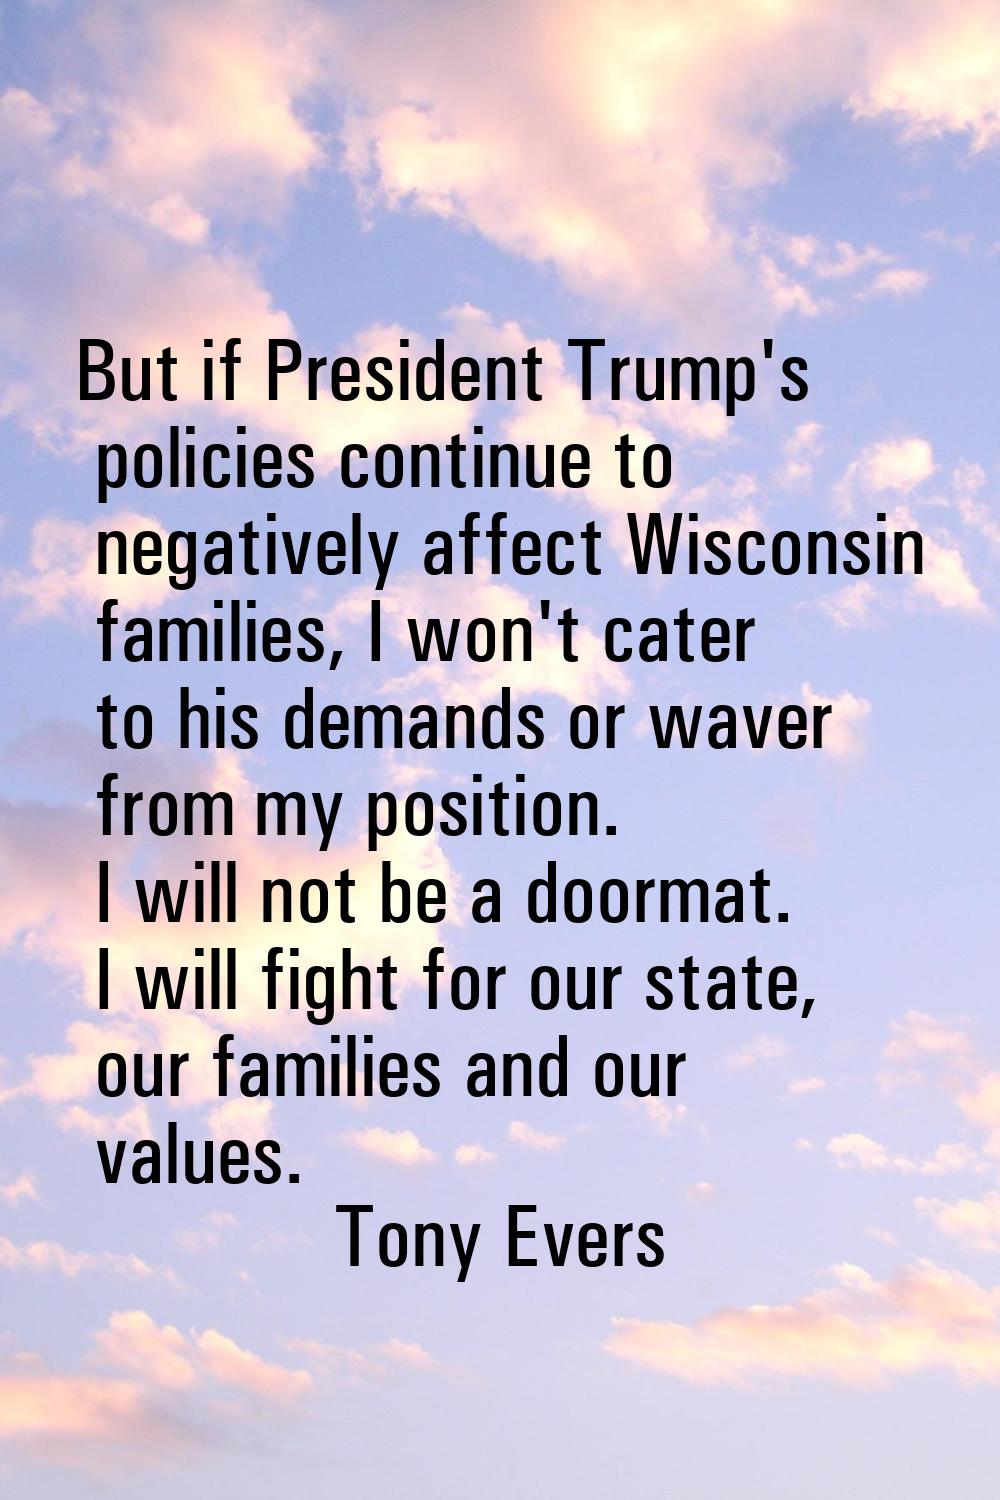 But if President Trump's policies continue to negatively affect Wisconsin families, I won't cater t